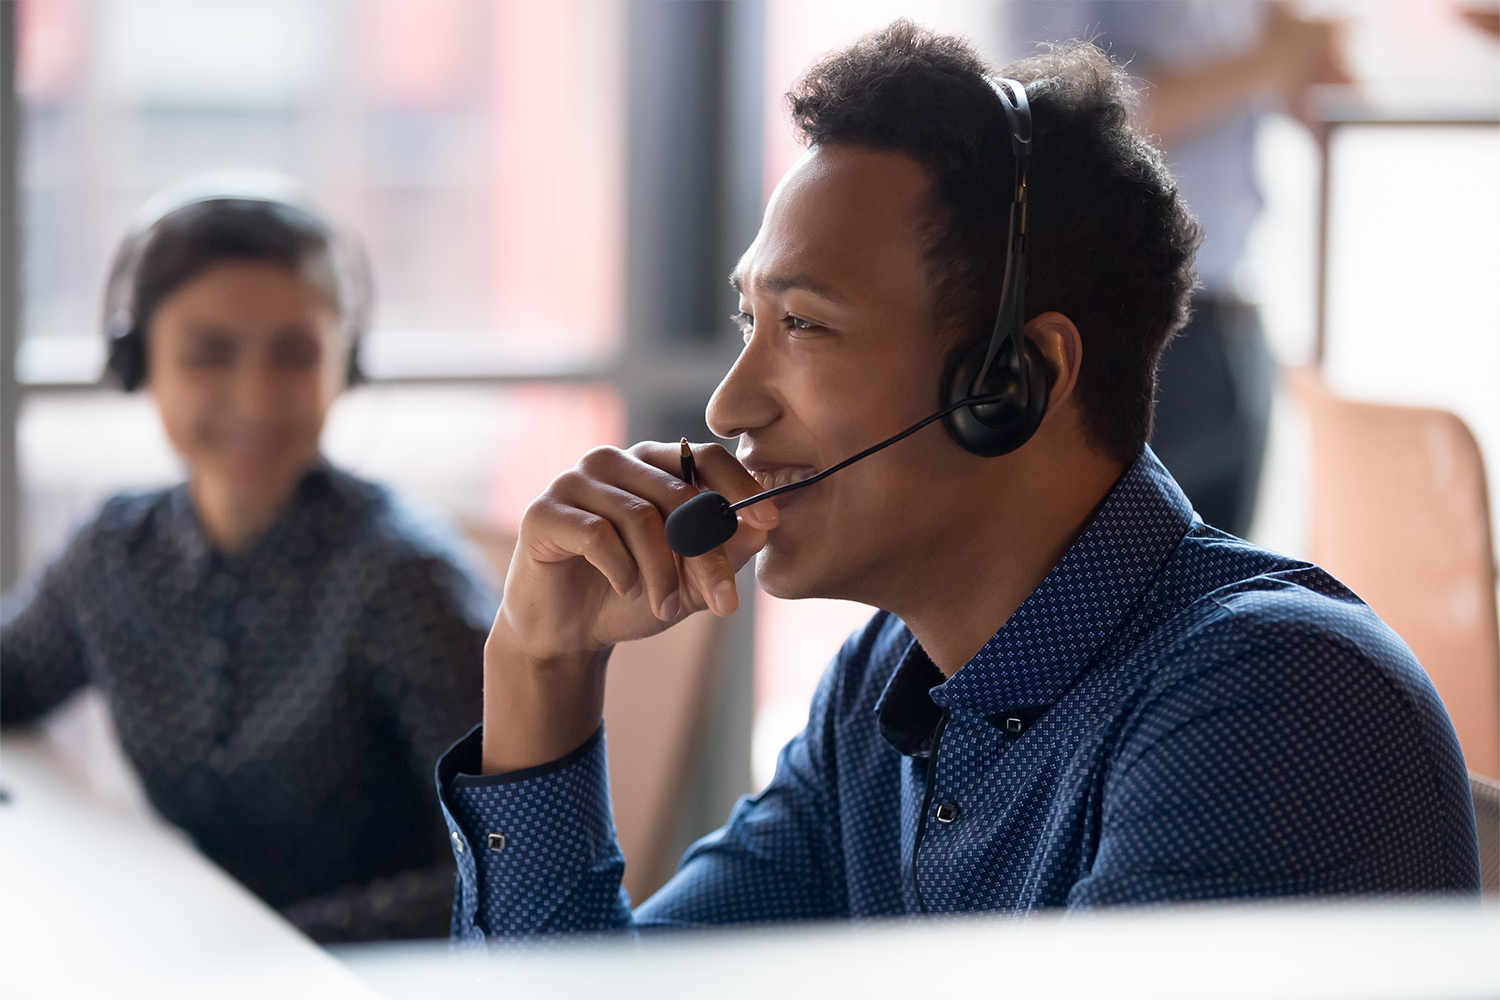 What Industries Most Benefit From Hiring BPO’s: Call Center Consulting